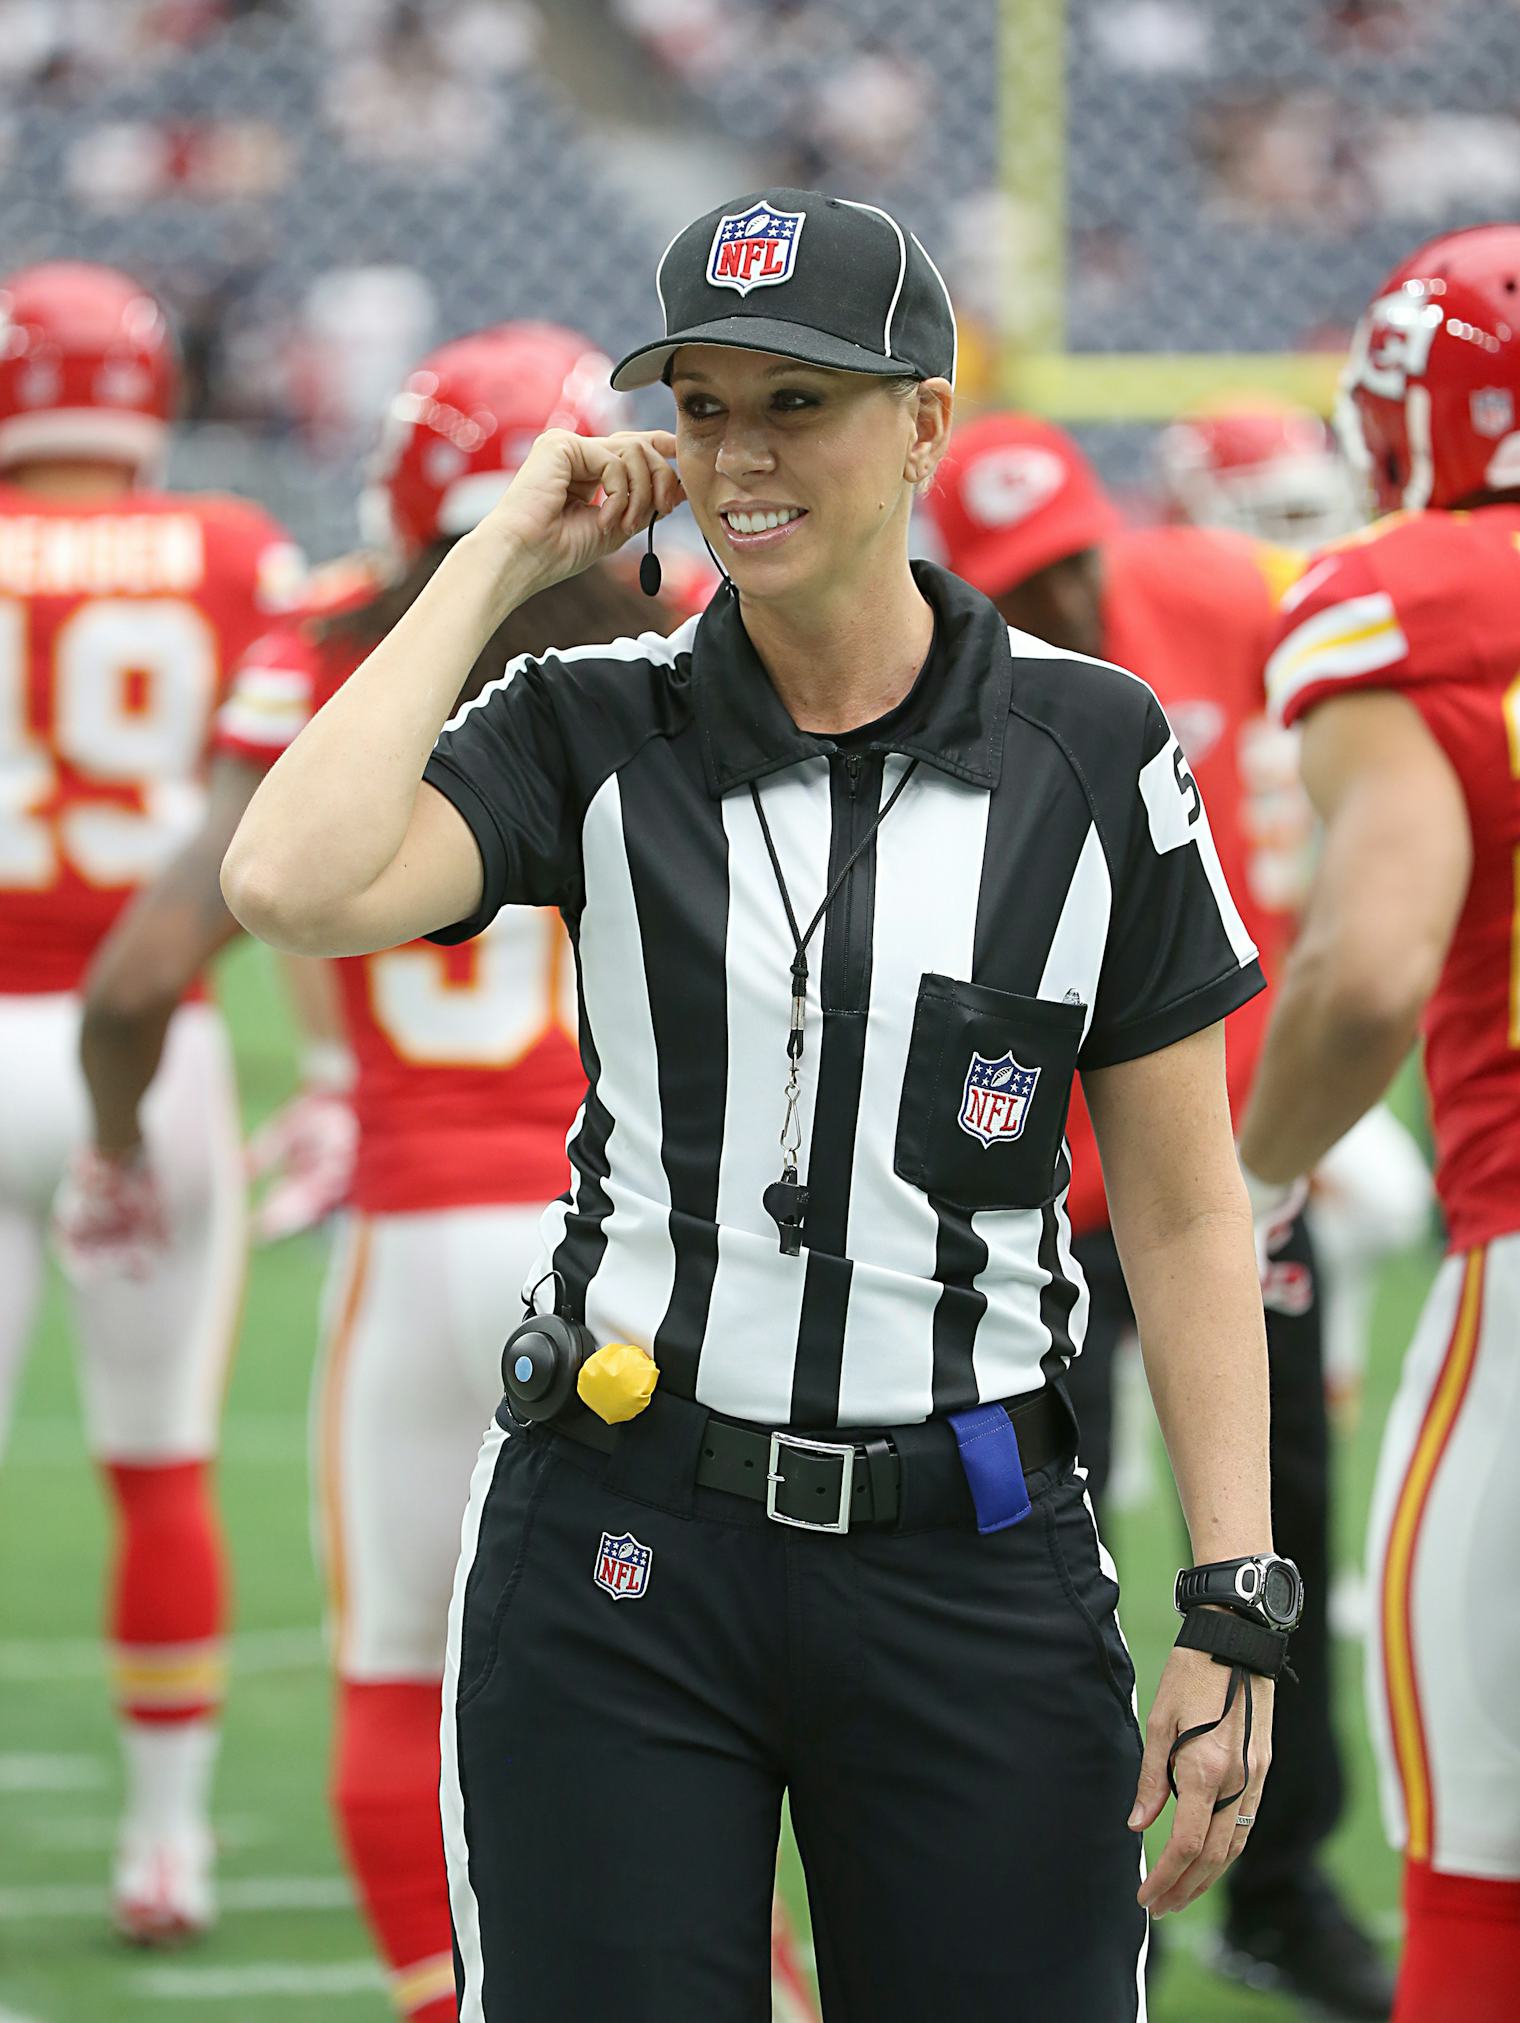 Sarah Thomas, The First Female Referee In The NFL, Has Some Solid Advice